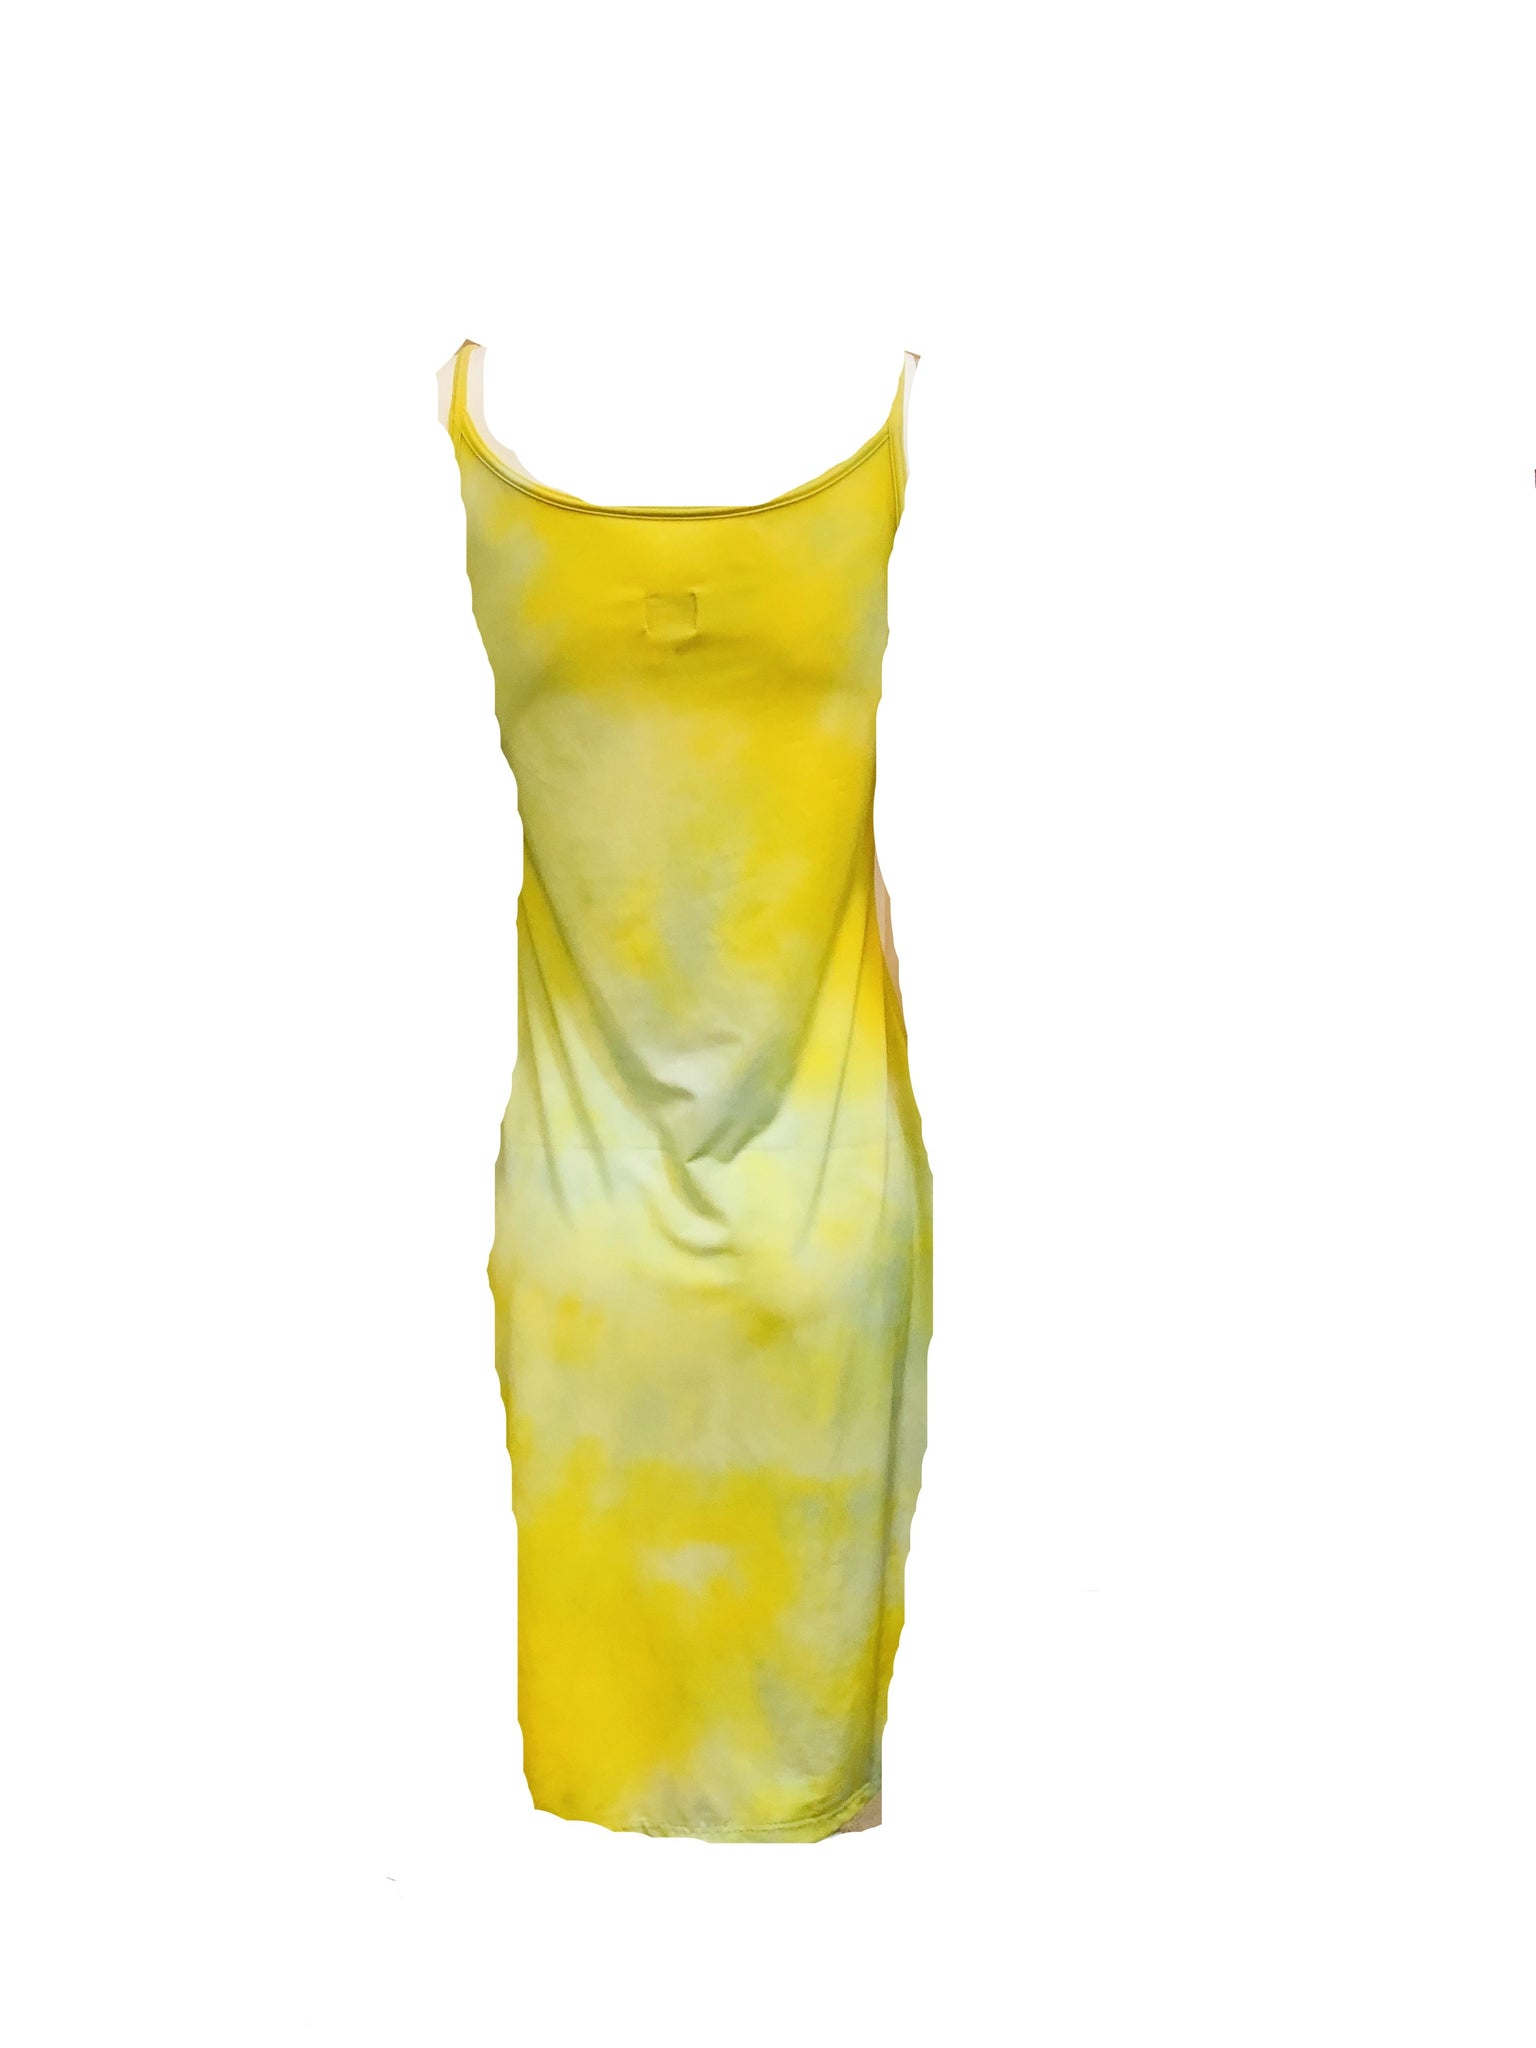 The People of the Labyrinths Yellow Green Tie Dye Jersey Tank Dress BACK 2 of 4